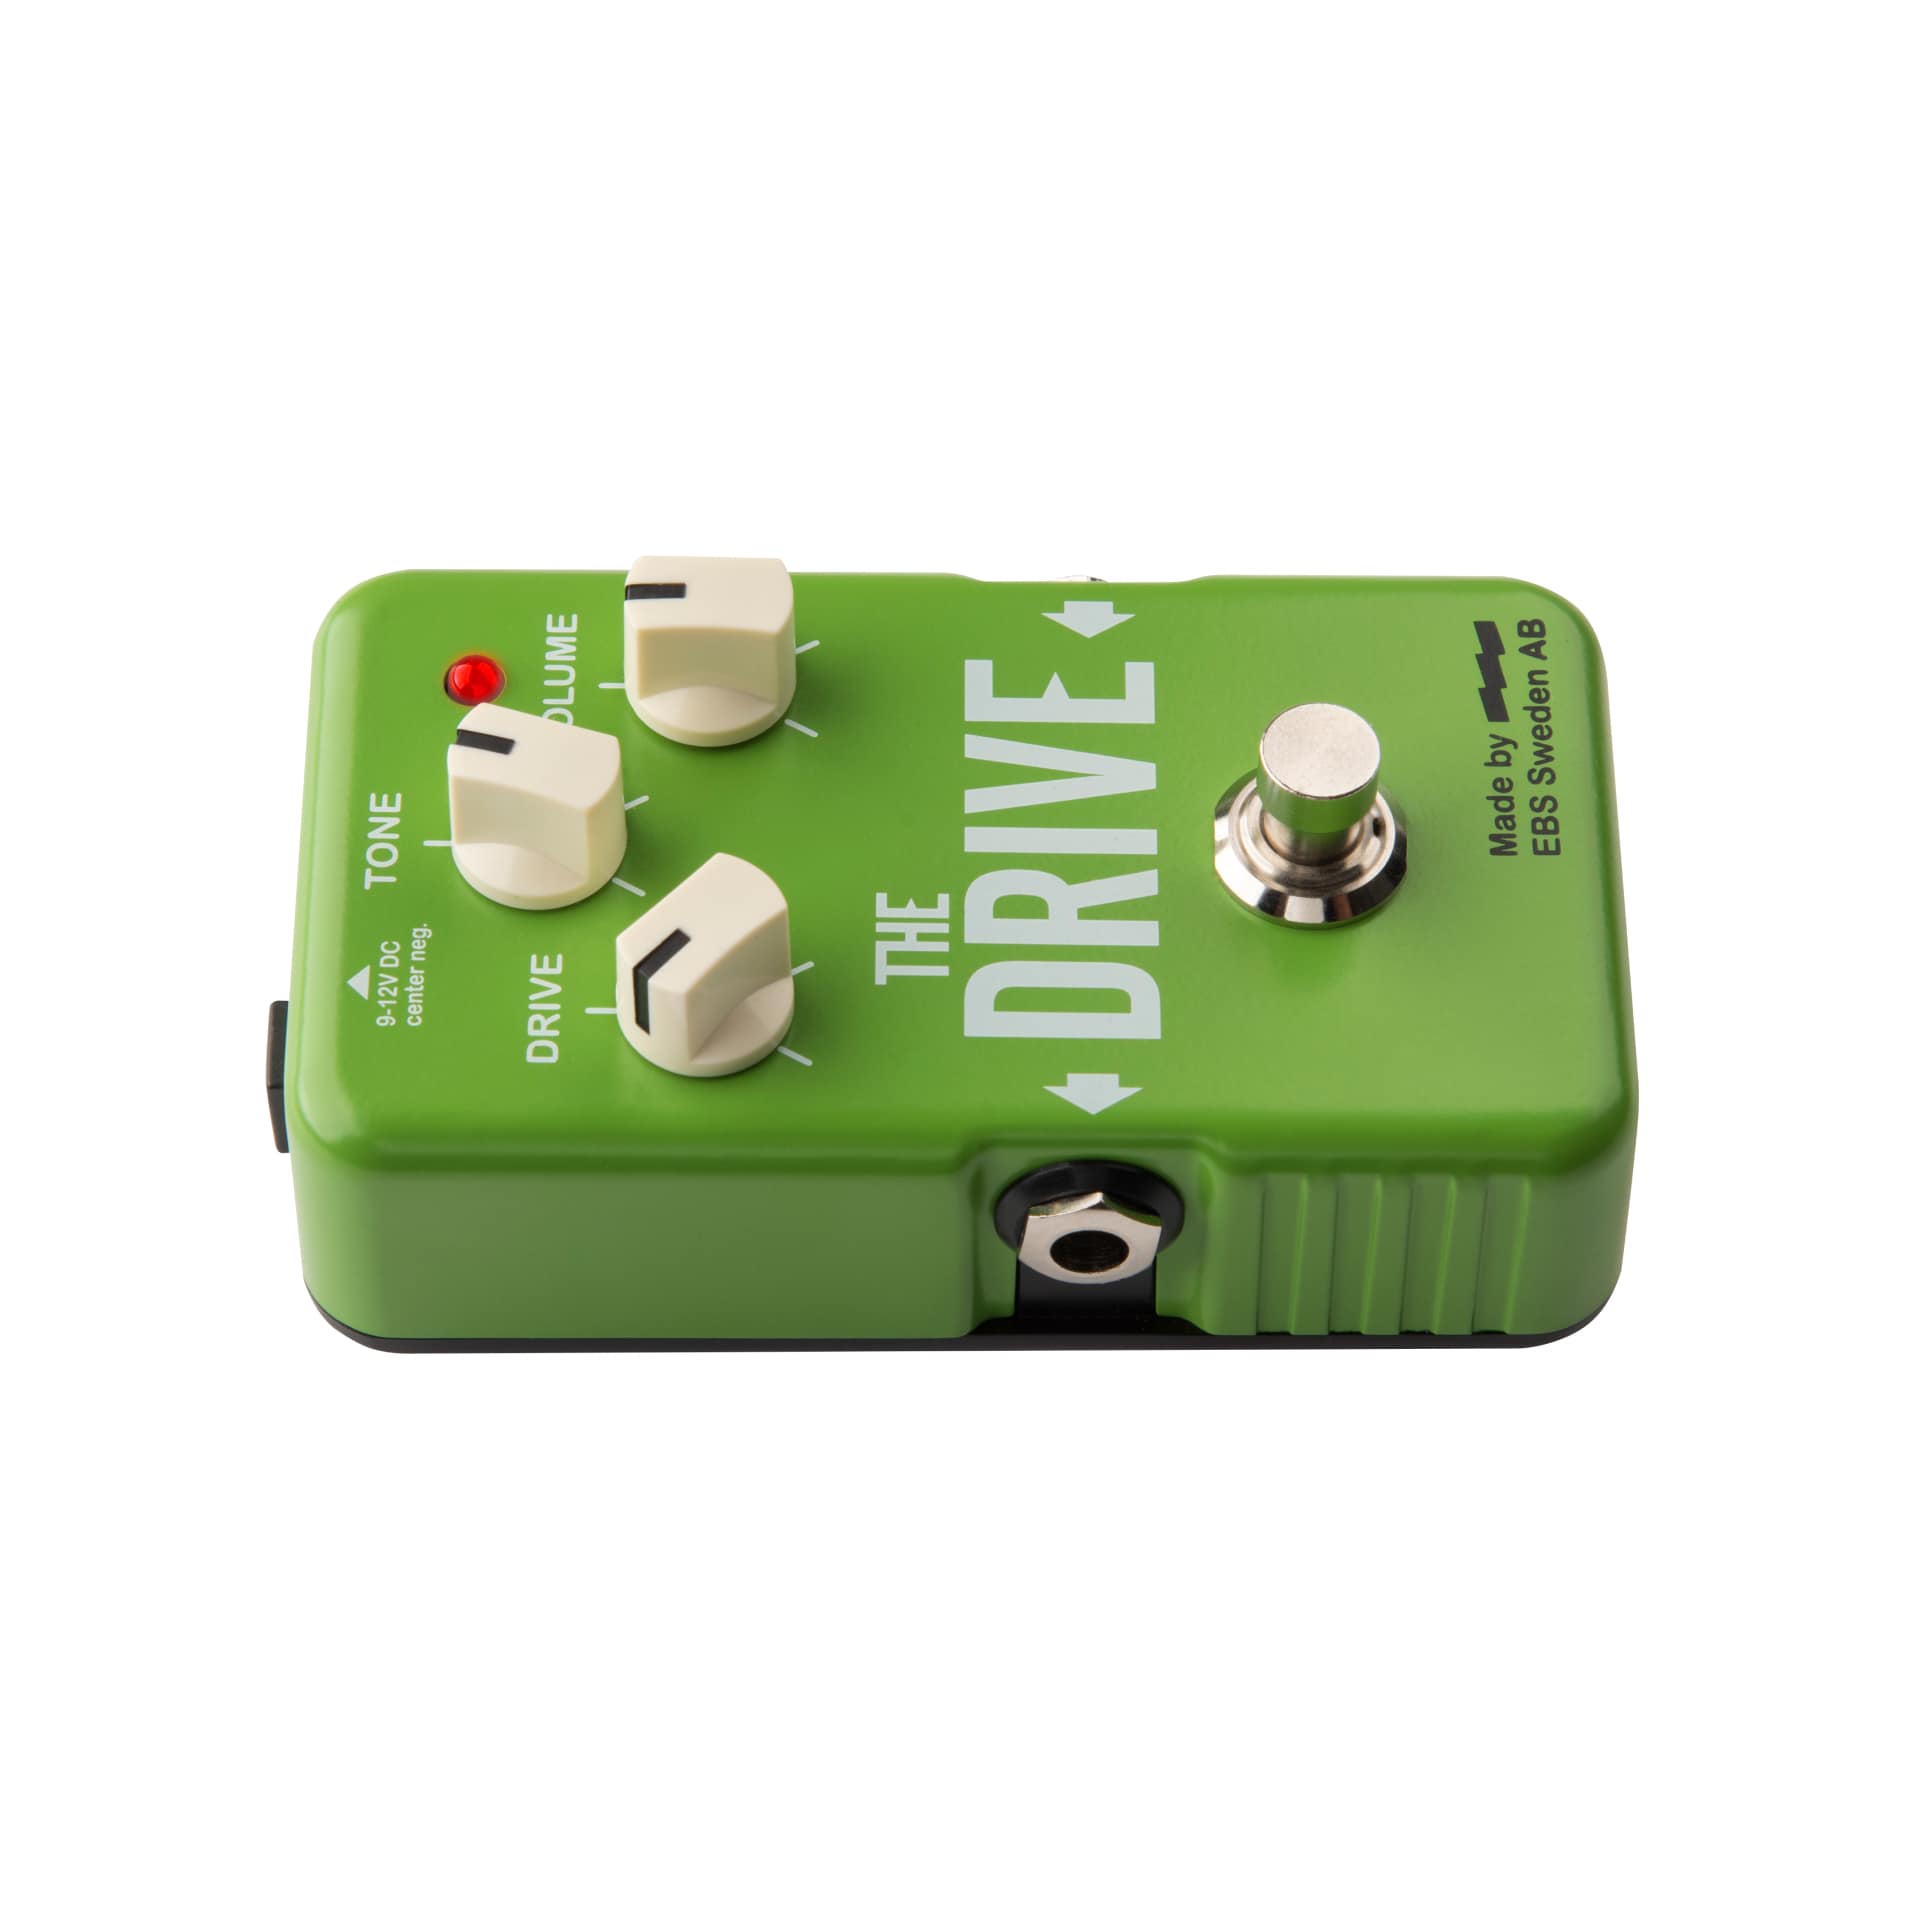 The Drive – boost / overdrive B-Stock